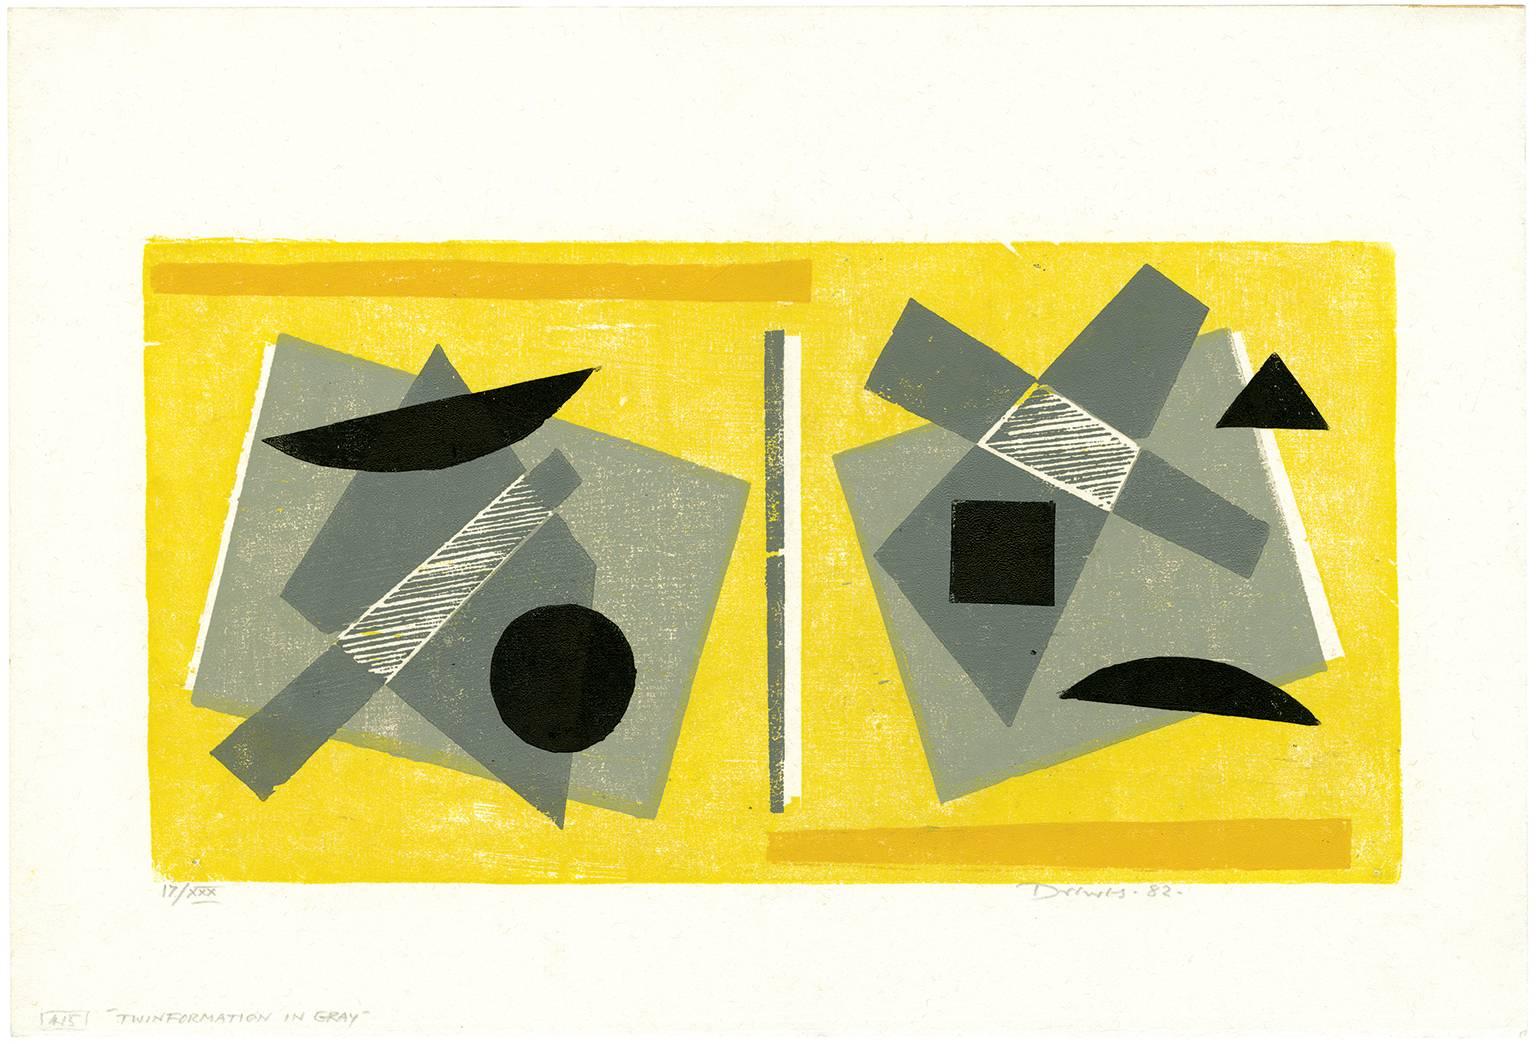 Twin Formation in Gray - Yellow Abstract Print by Werner Drewes